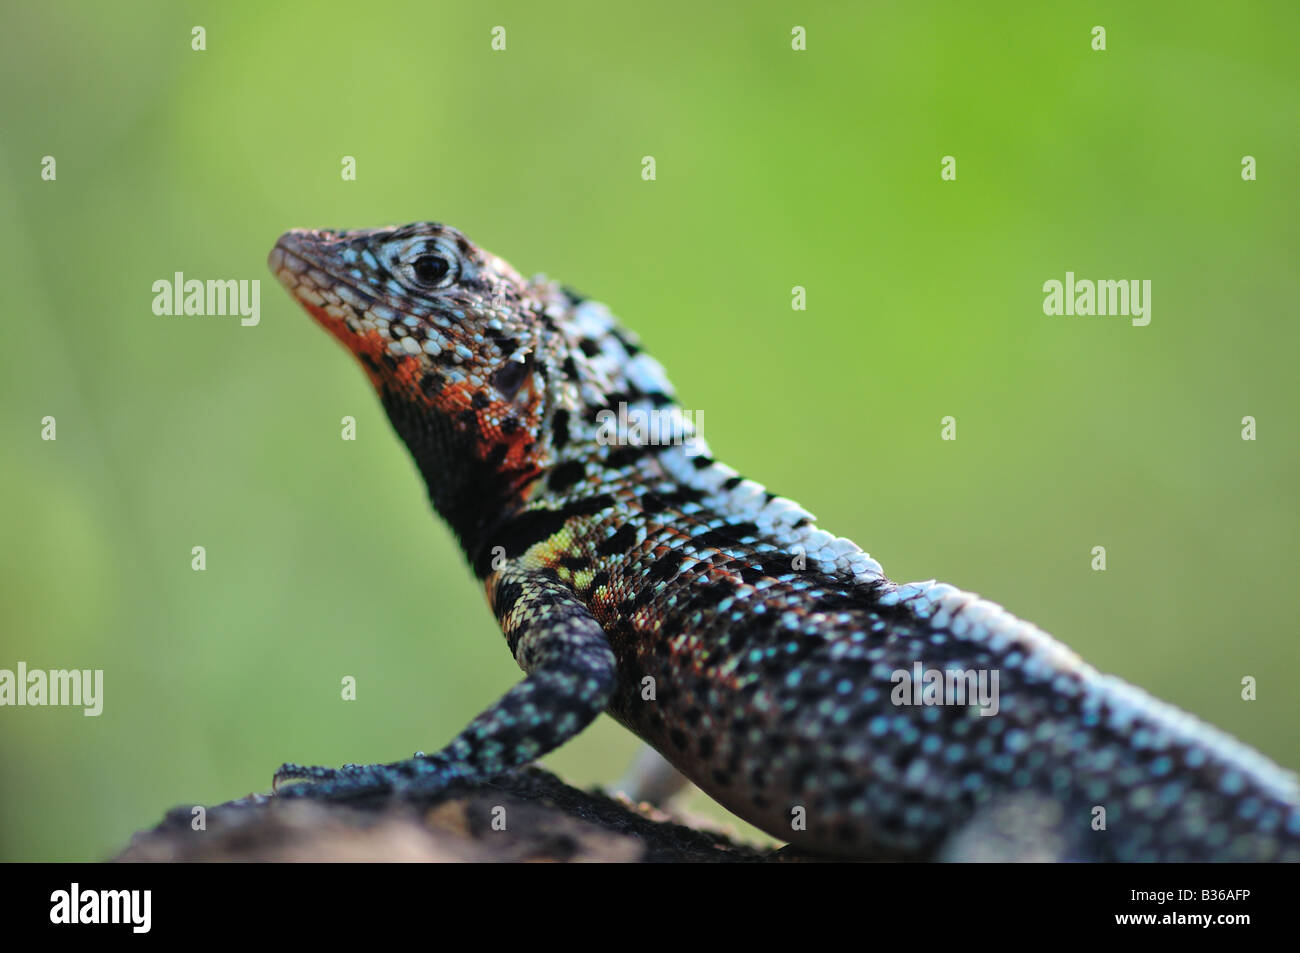 A male lava lizard, perched on a rock, looks up cautiously. Stock Photo